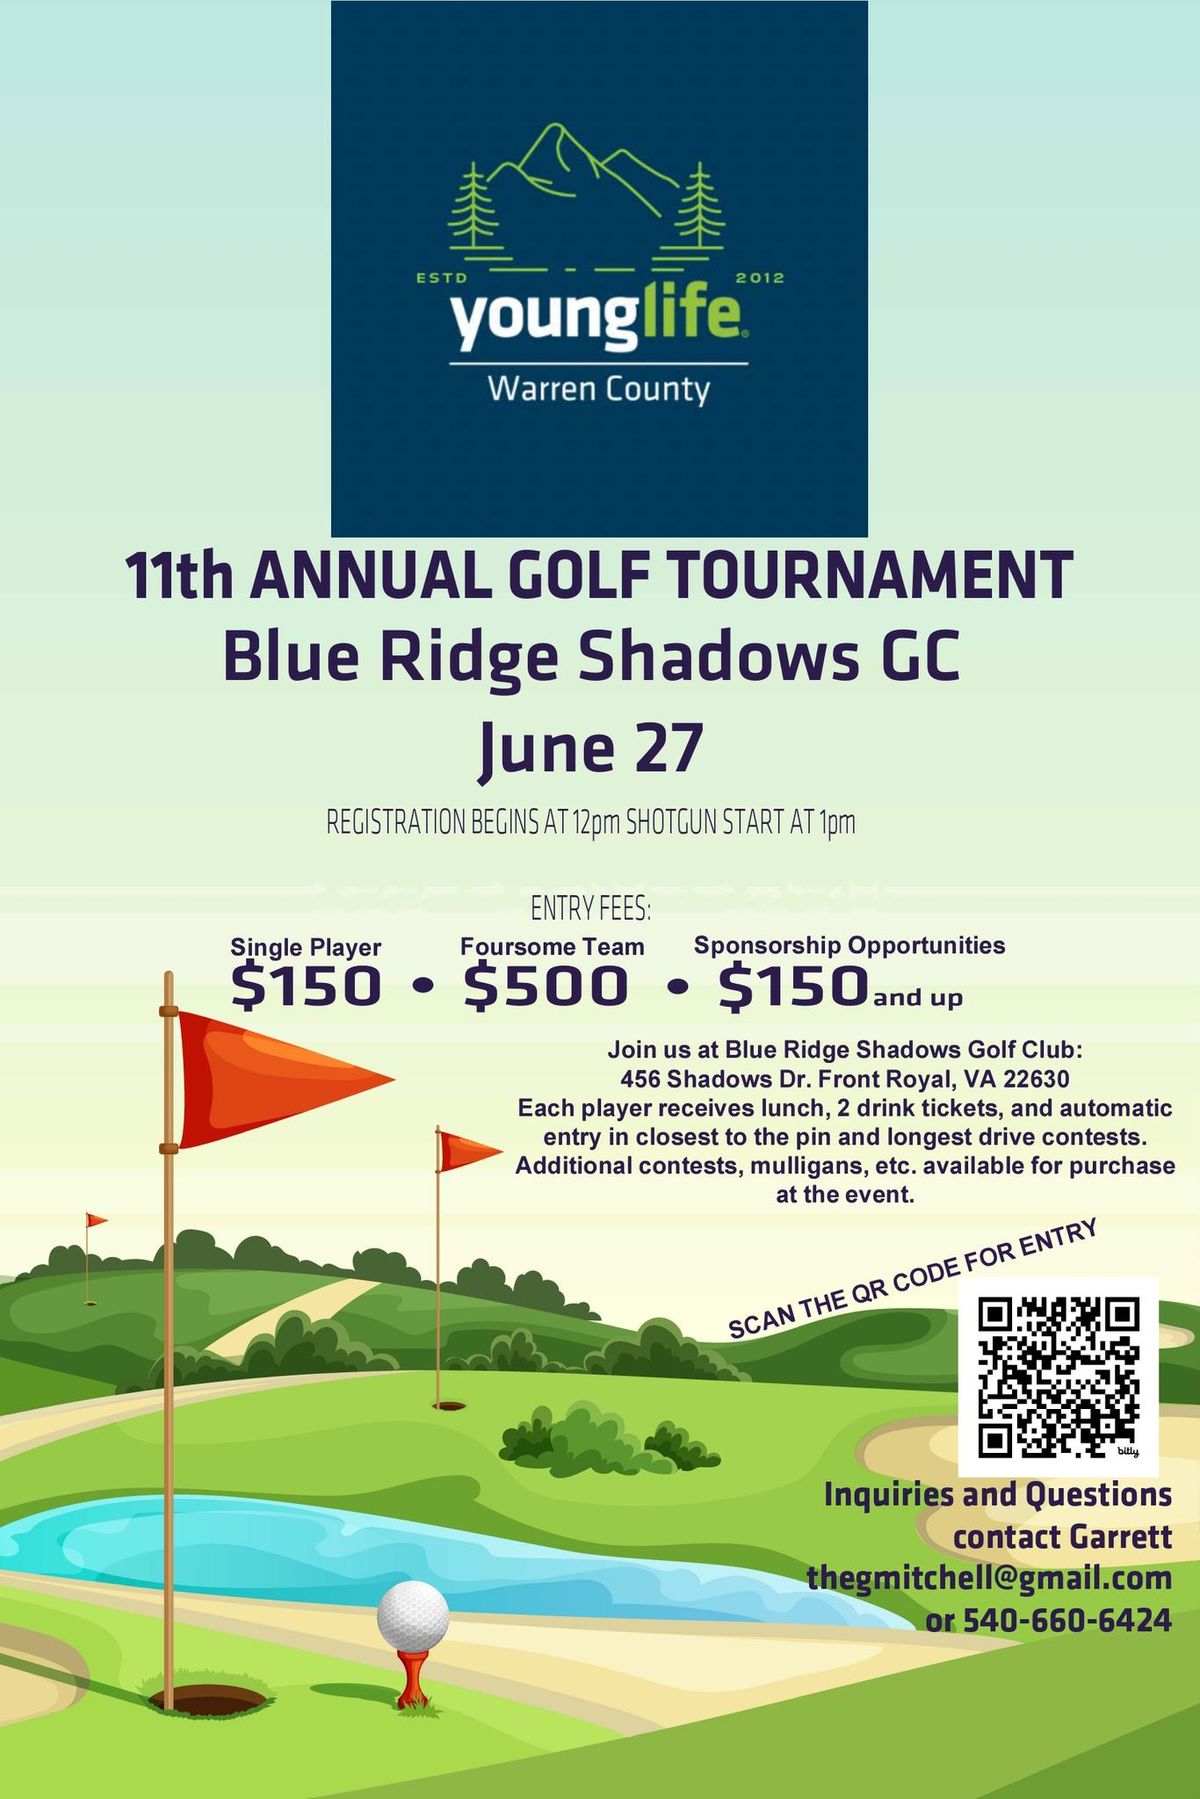 11th Annual Young Life Golf Tournament